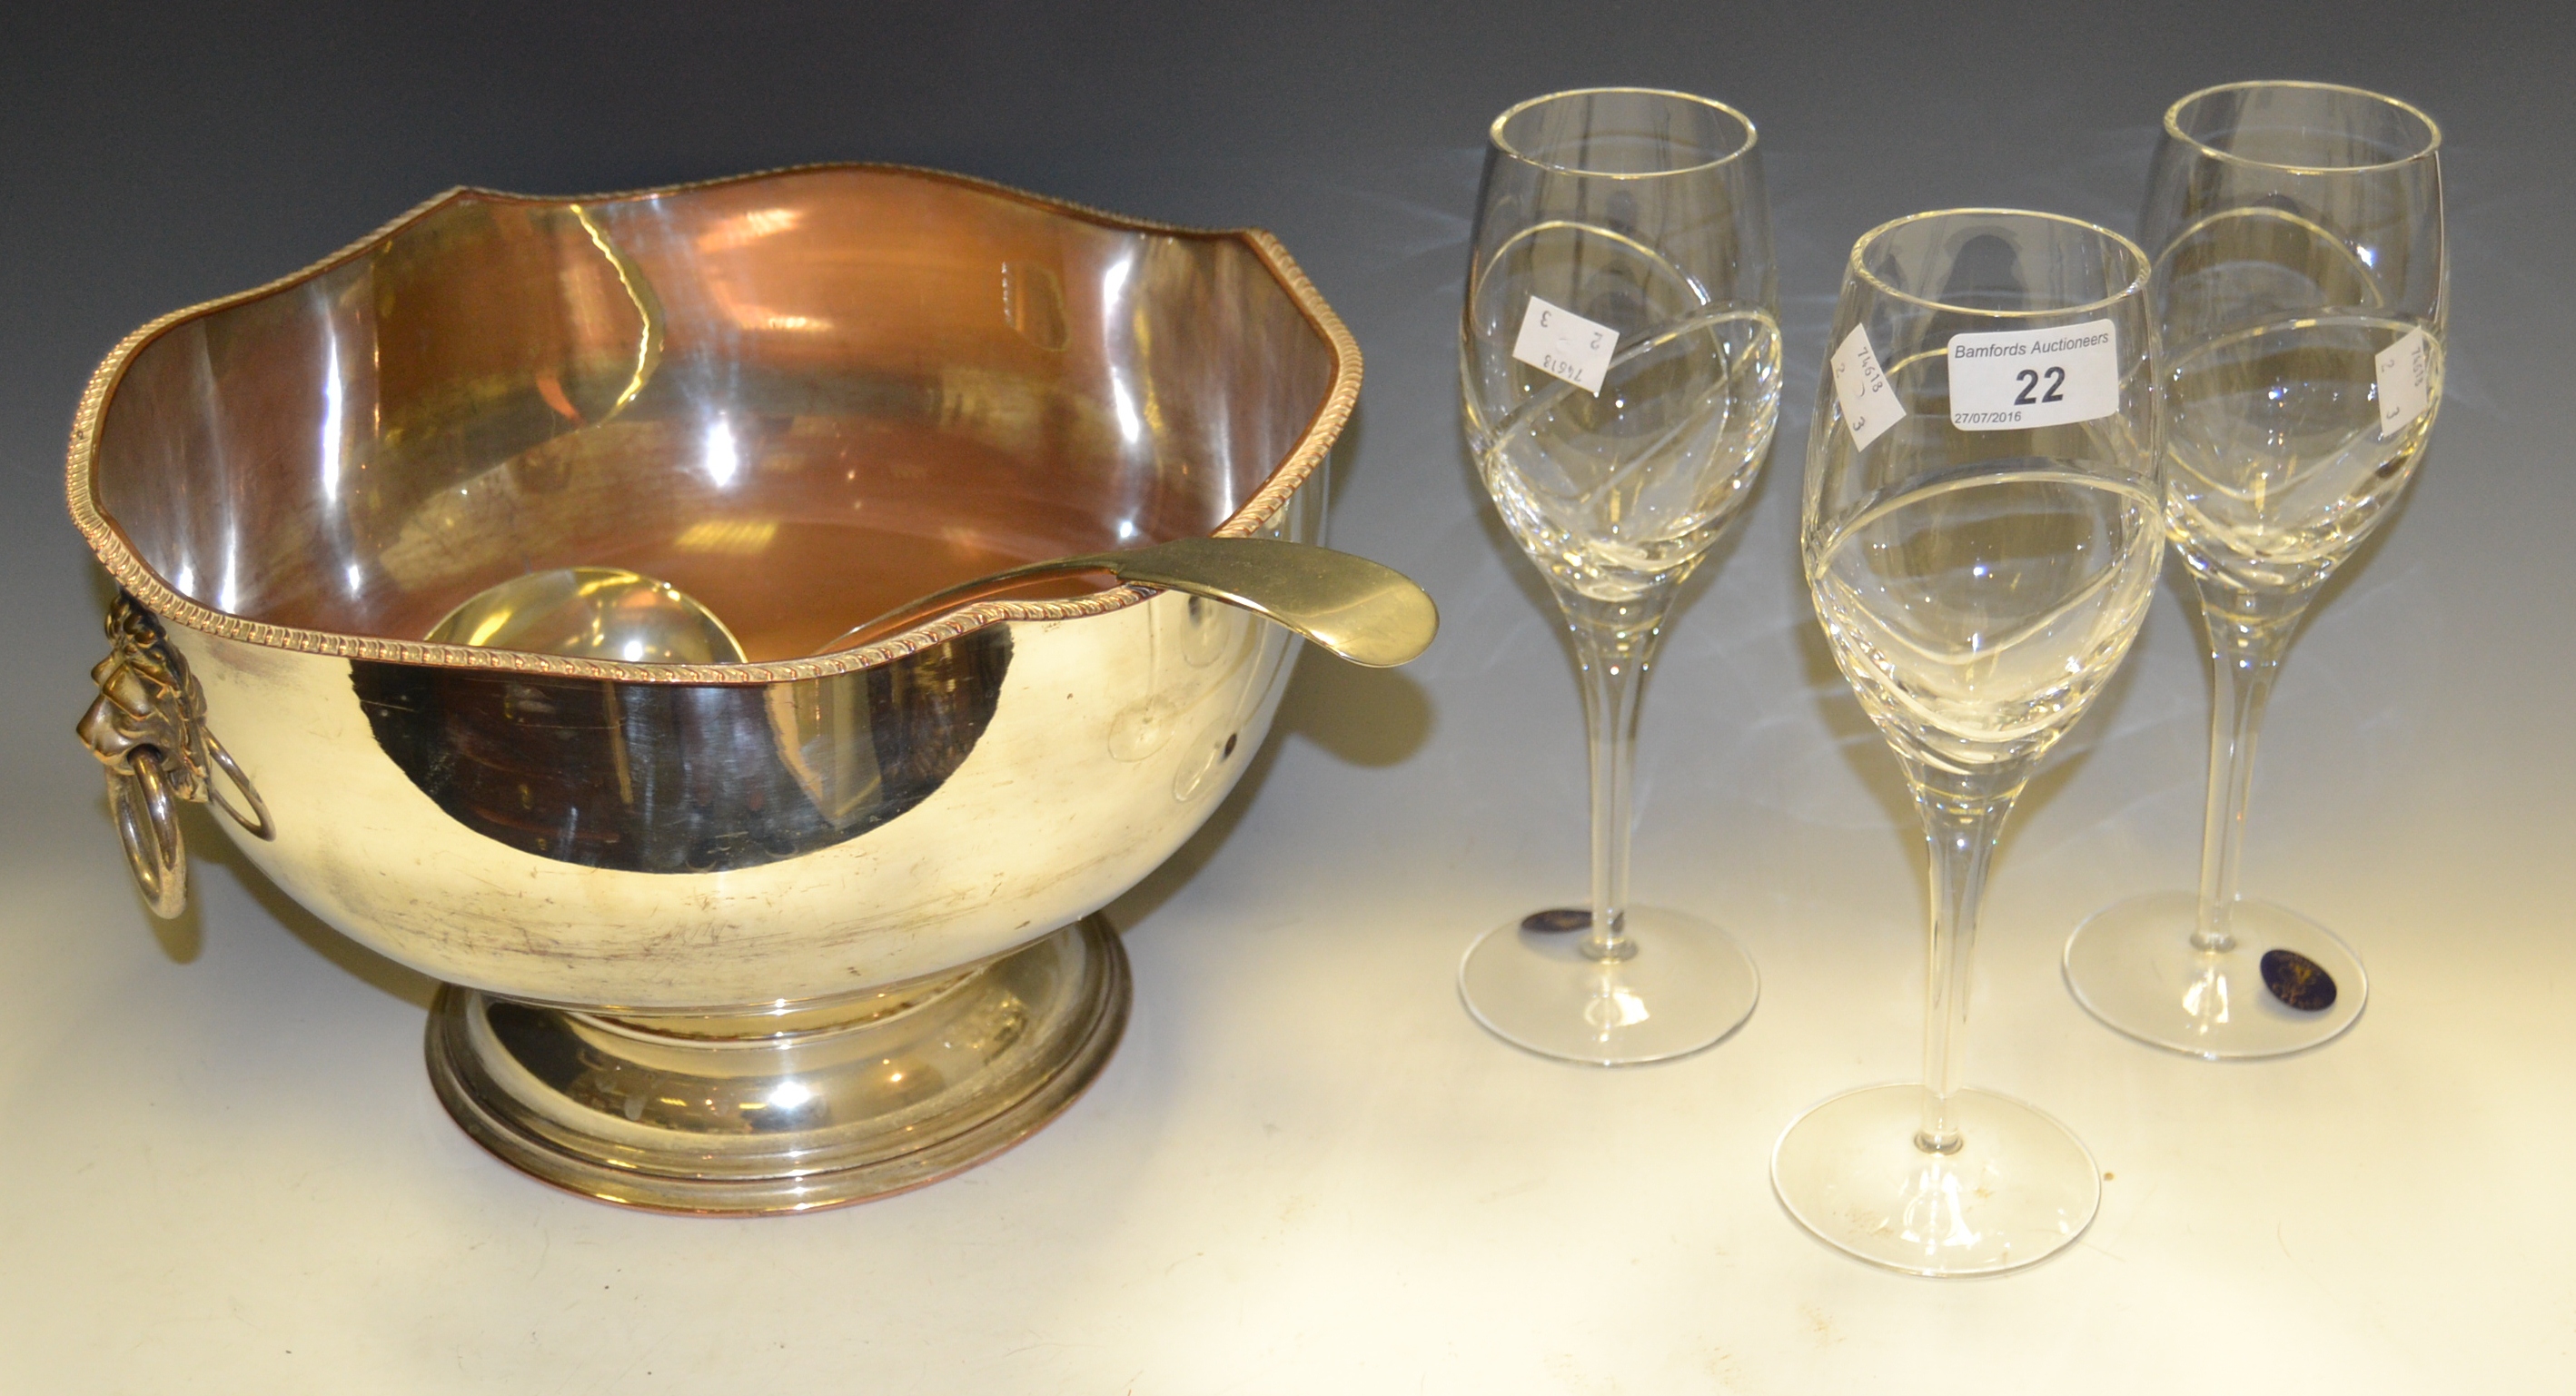 A set of 3 Tutbury crystal wine goblets; an EPNS punch bowl and ladle.